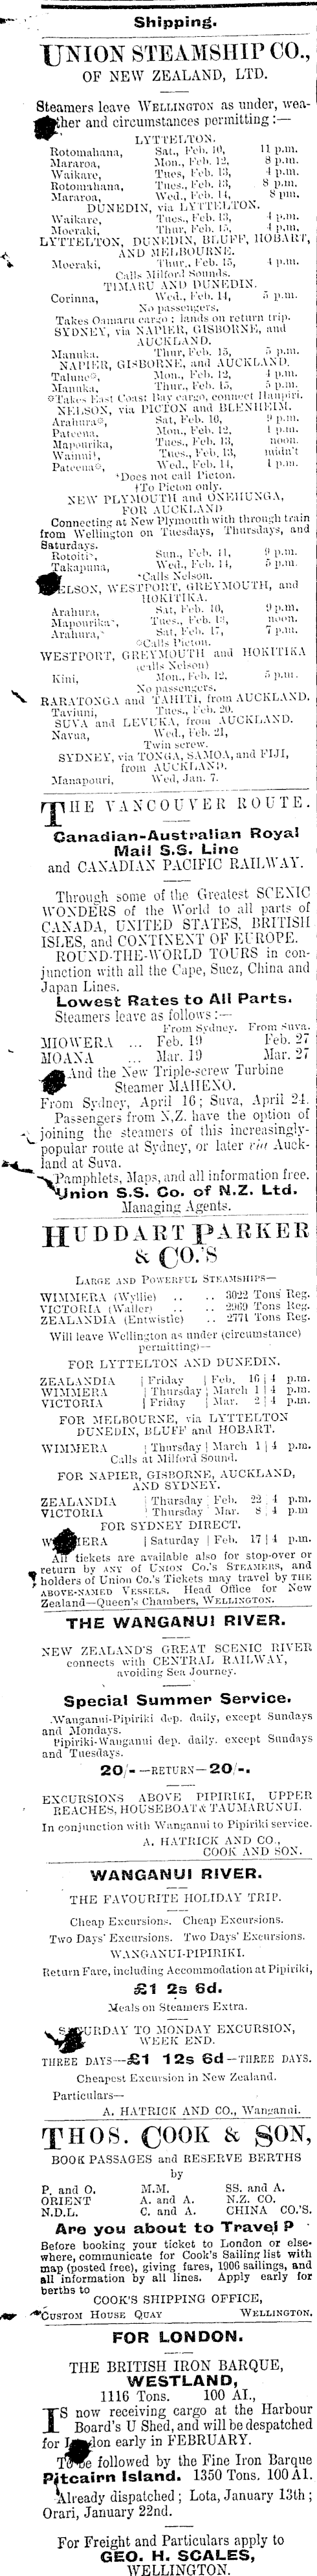 Papers Past Newspapers Wairarapa Daily Times 10 February 1906 Page 1 Advertisements Column 1